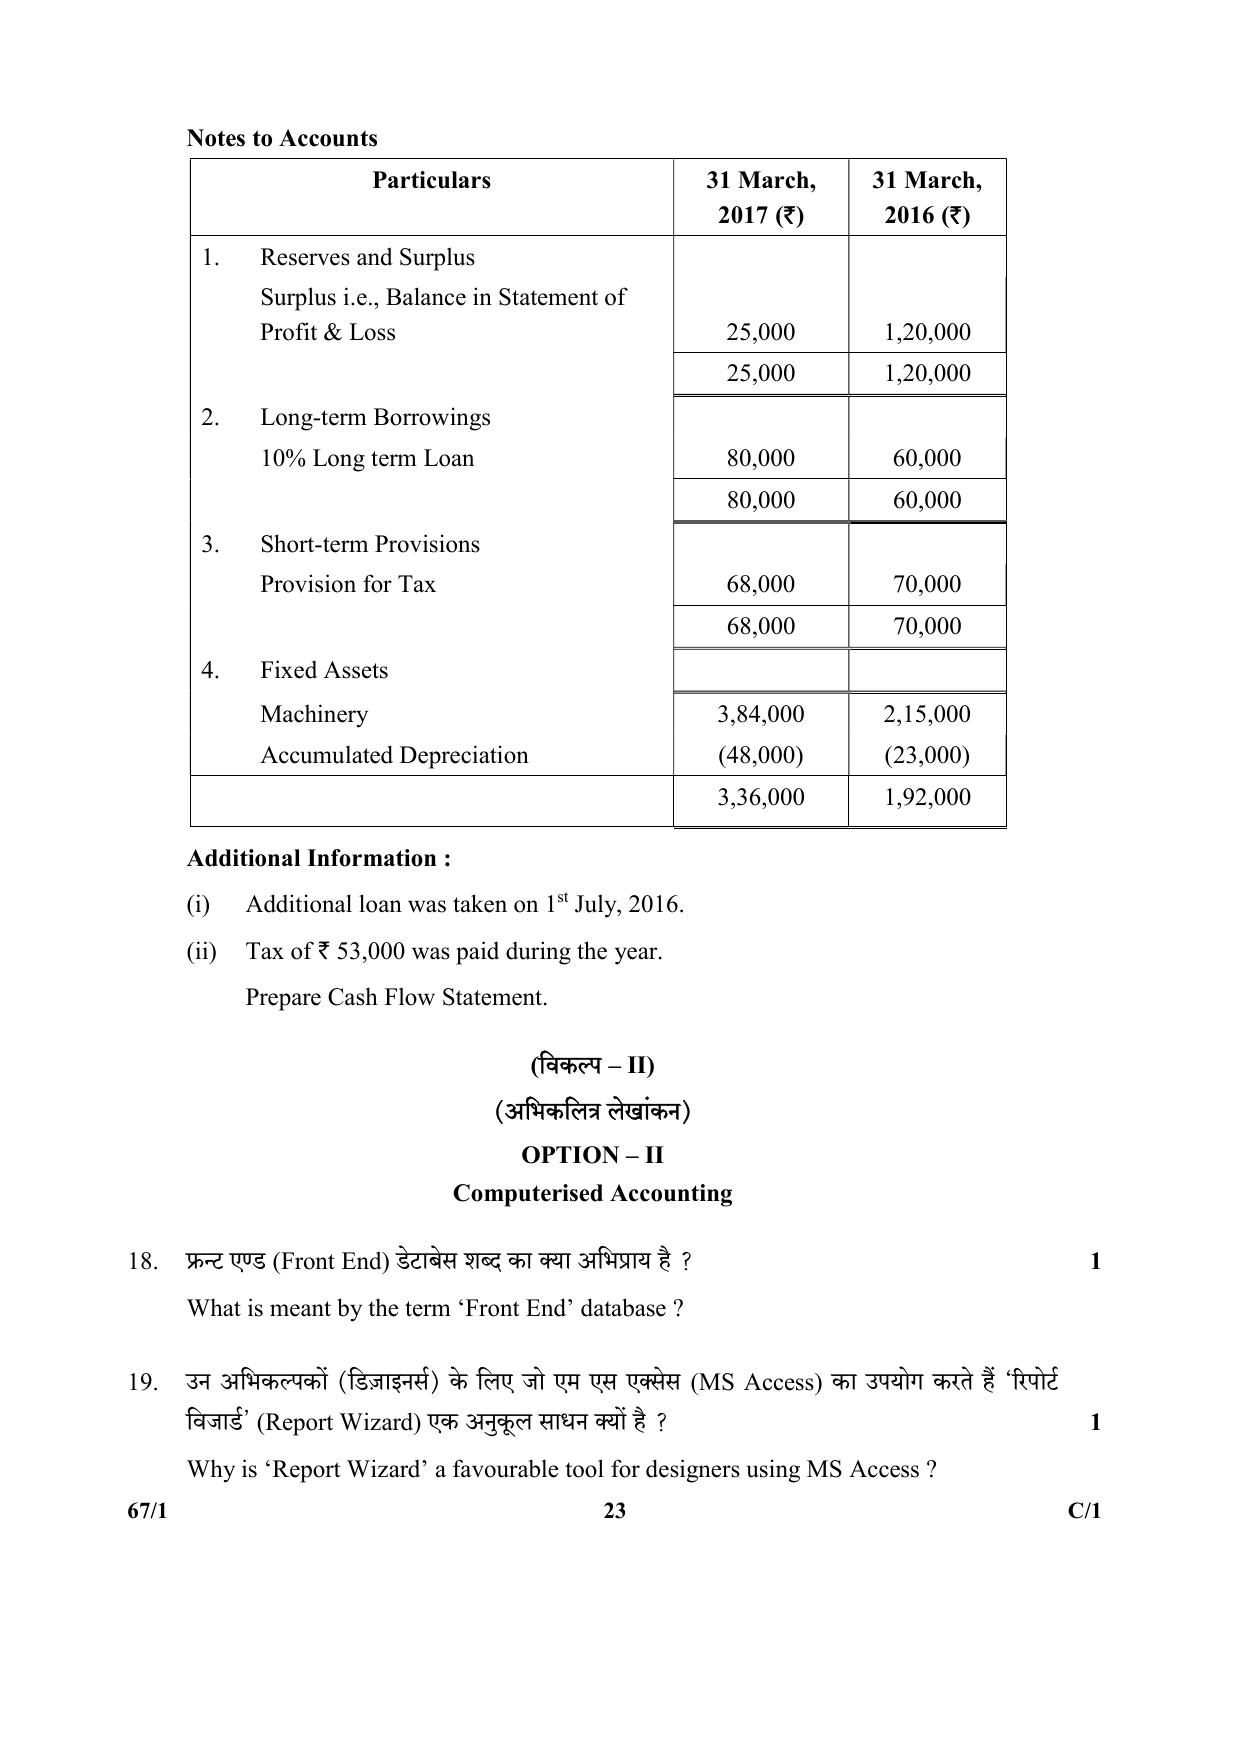 CBSE Class 12 67-1  (Accountancy) 2018 Compartment Question Paper - Page 23